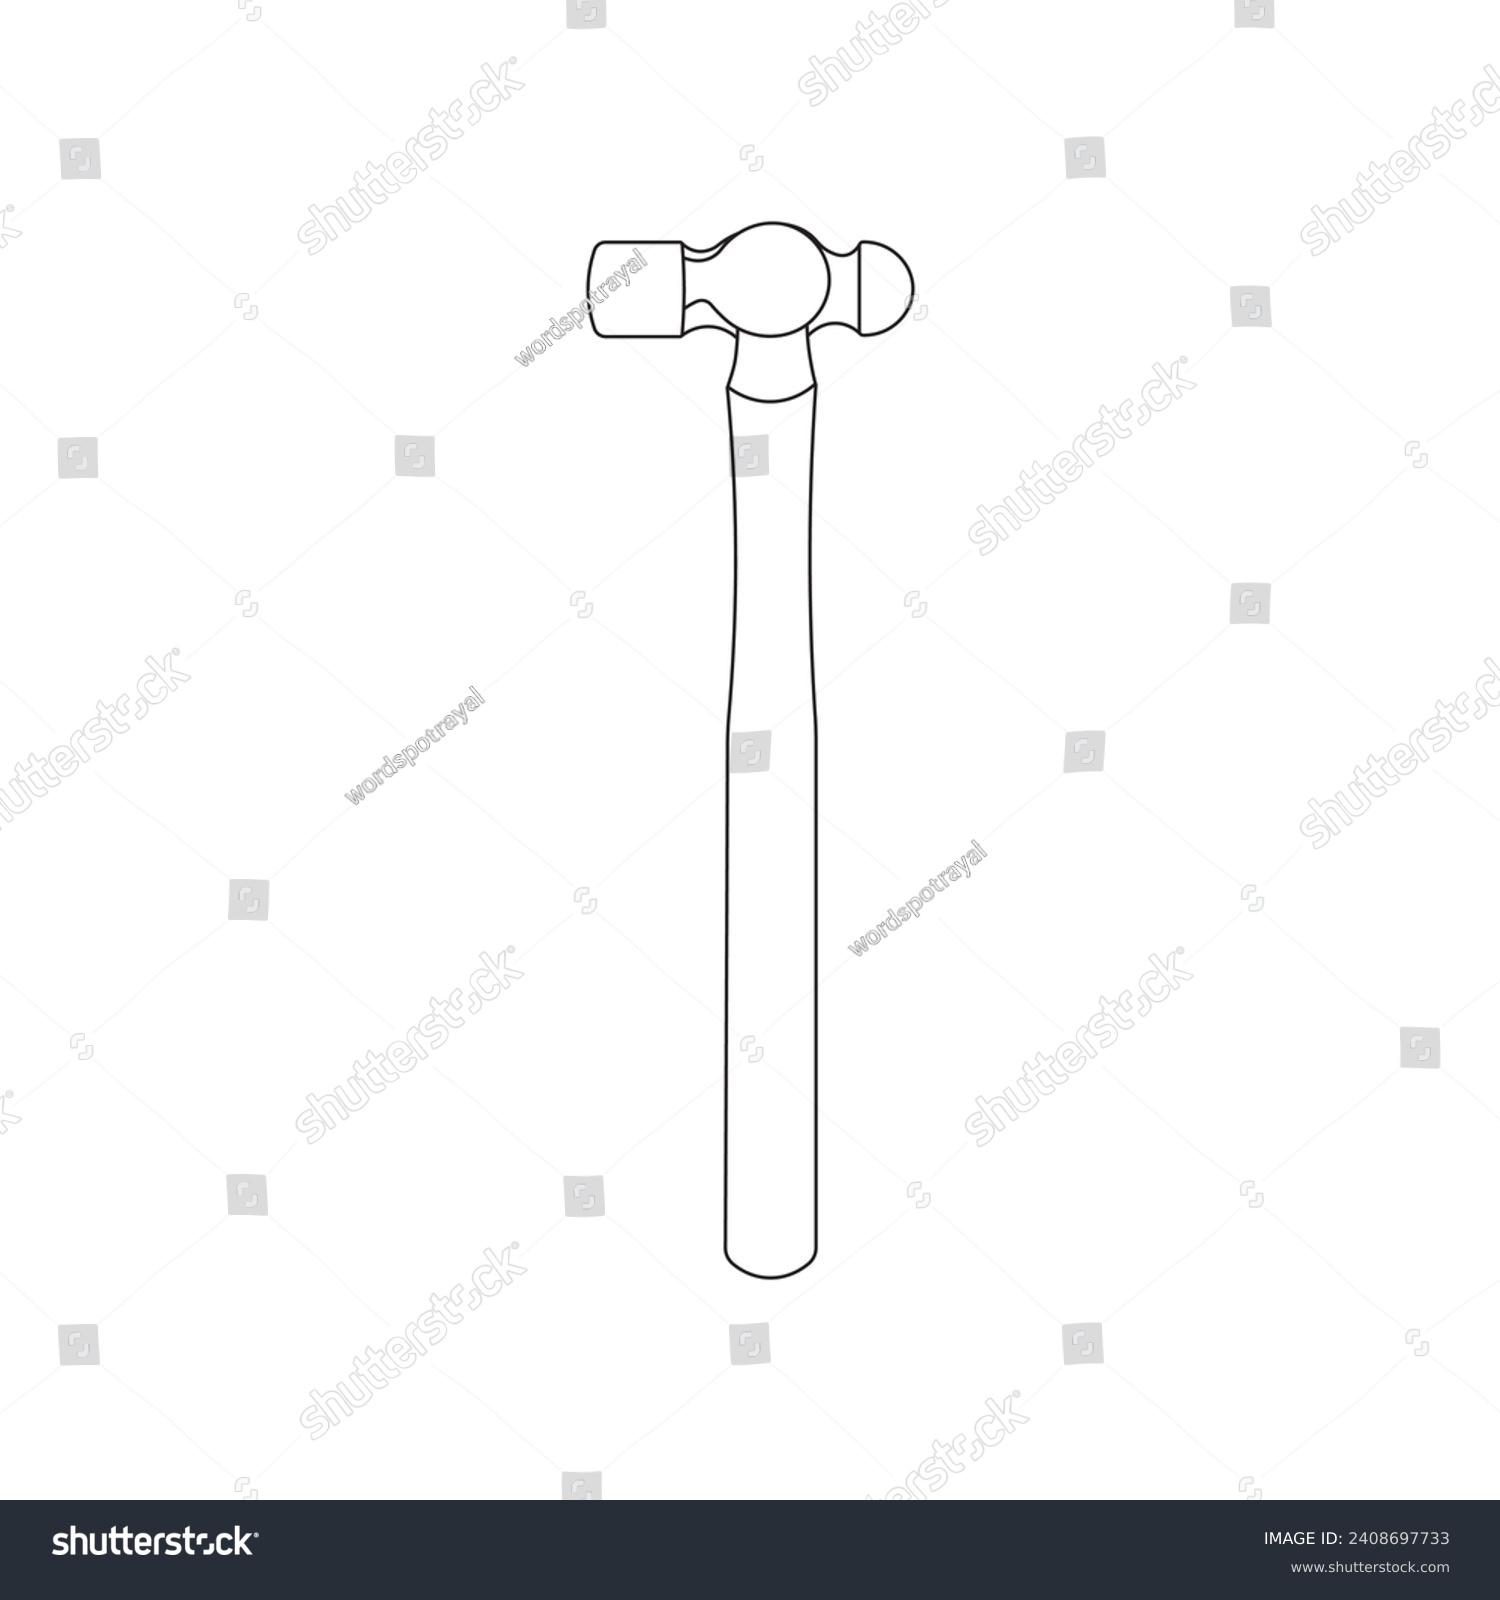 SVG of Hand drawn Kids drawing Cartoon Vector illustration ball peen hammer icon Isolated on White Background svg